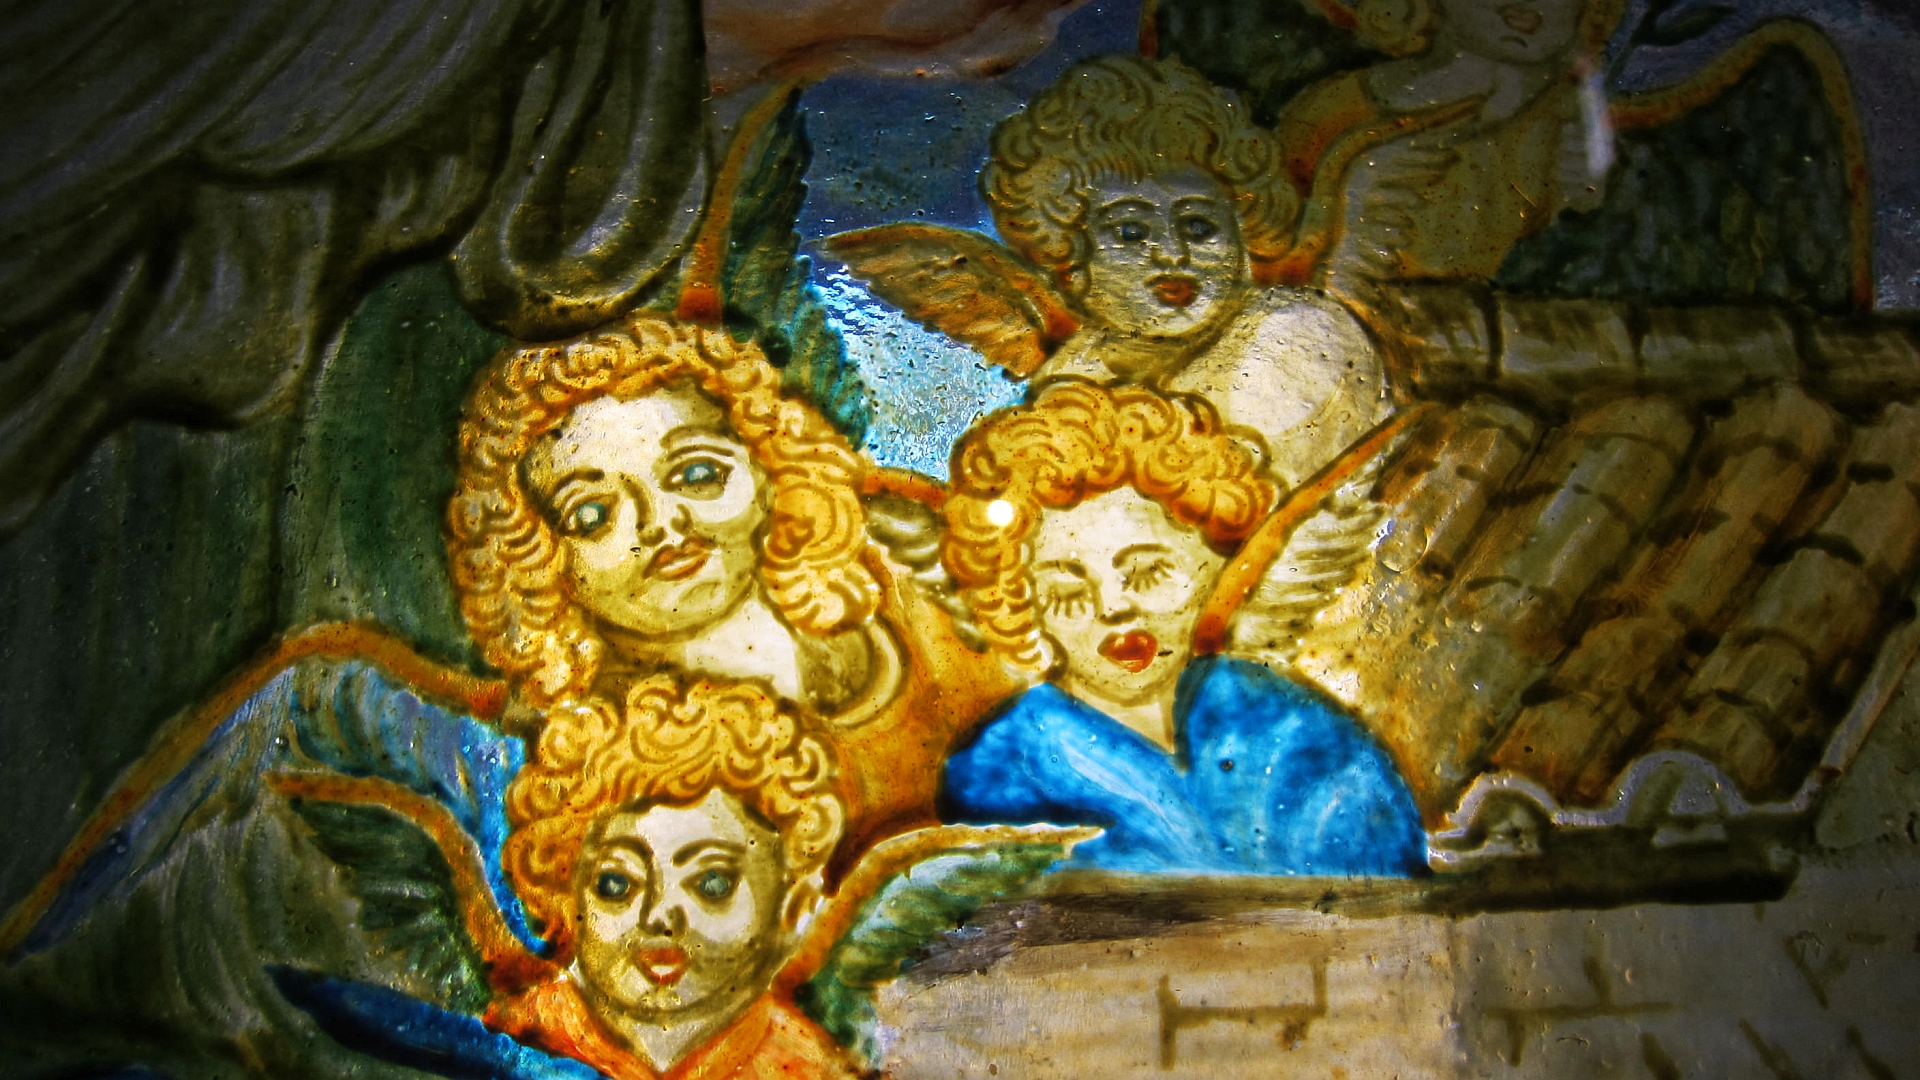 the painting depicts many angel on either side of the wall